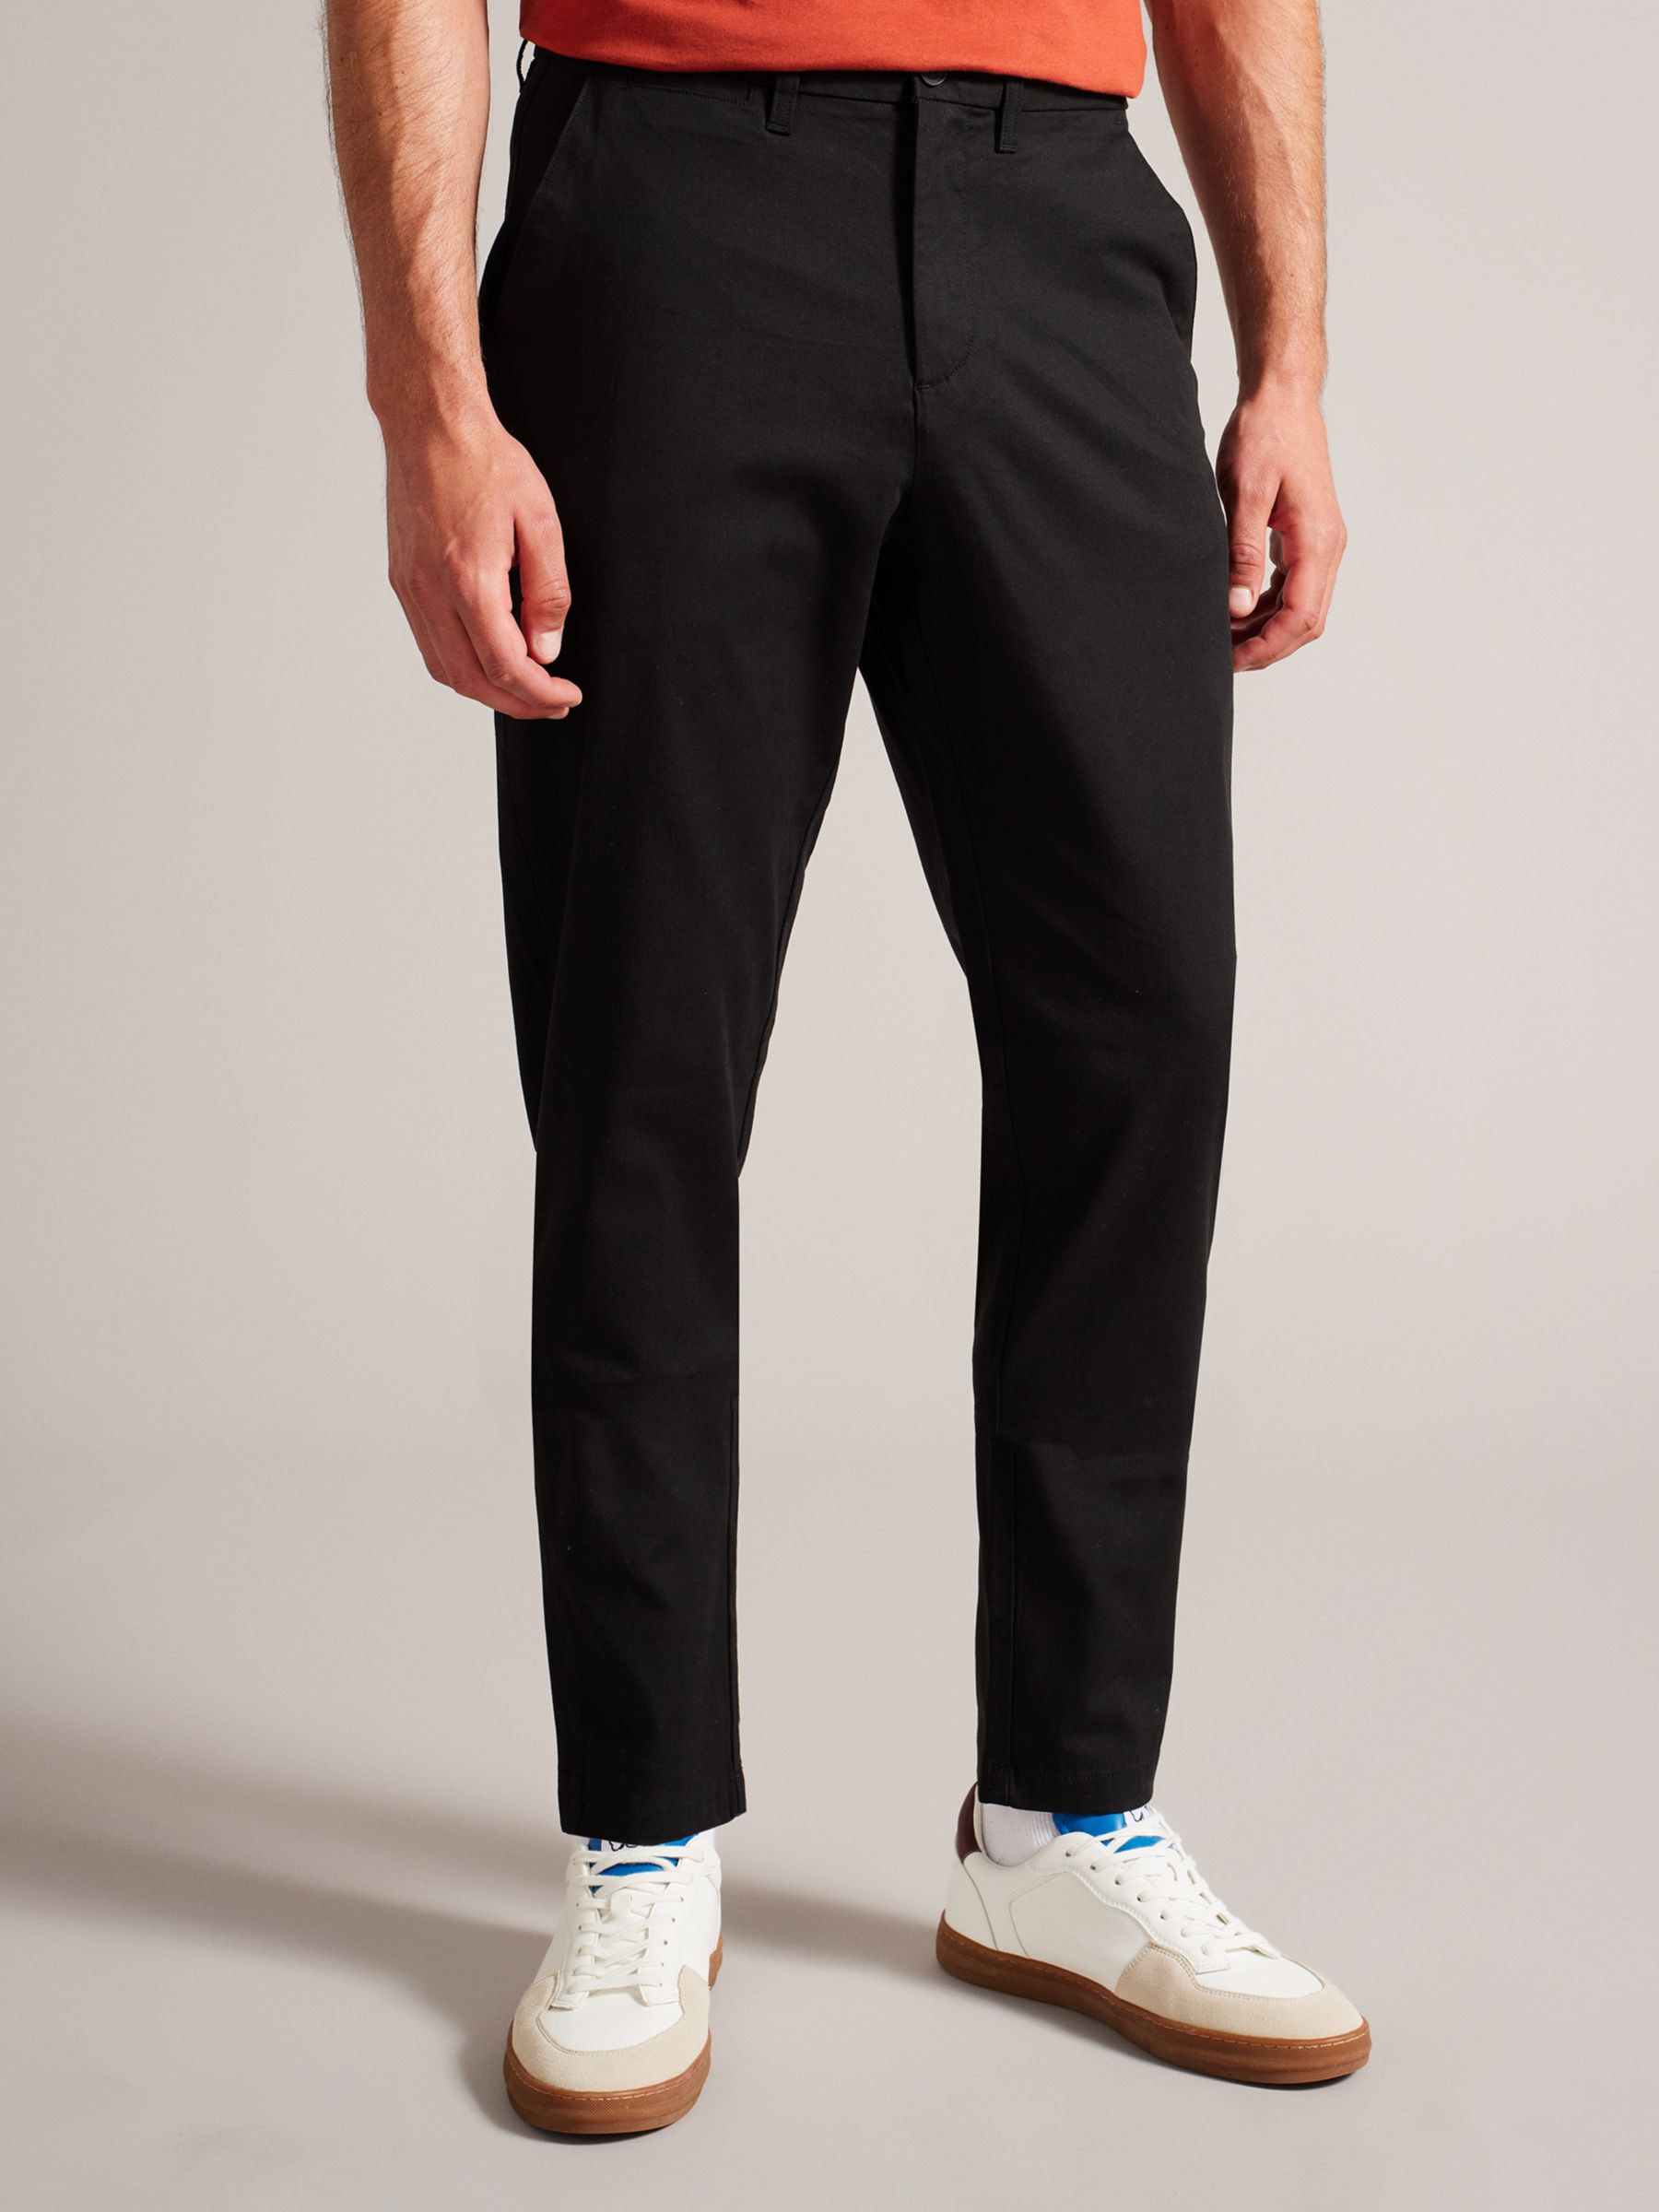 Buy Ted Baker Haybrn Blue Navy Chino Trouser Online at johnlewis.com